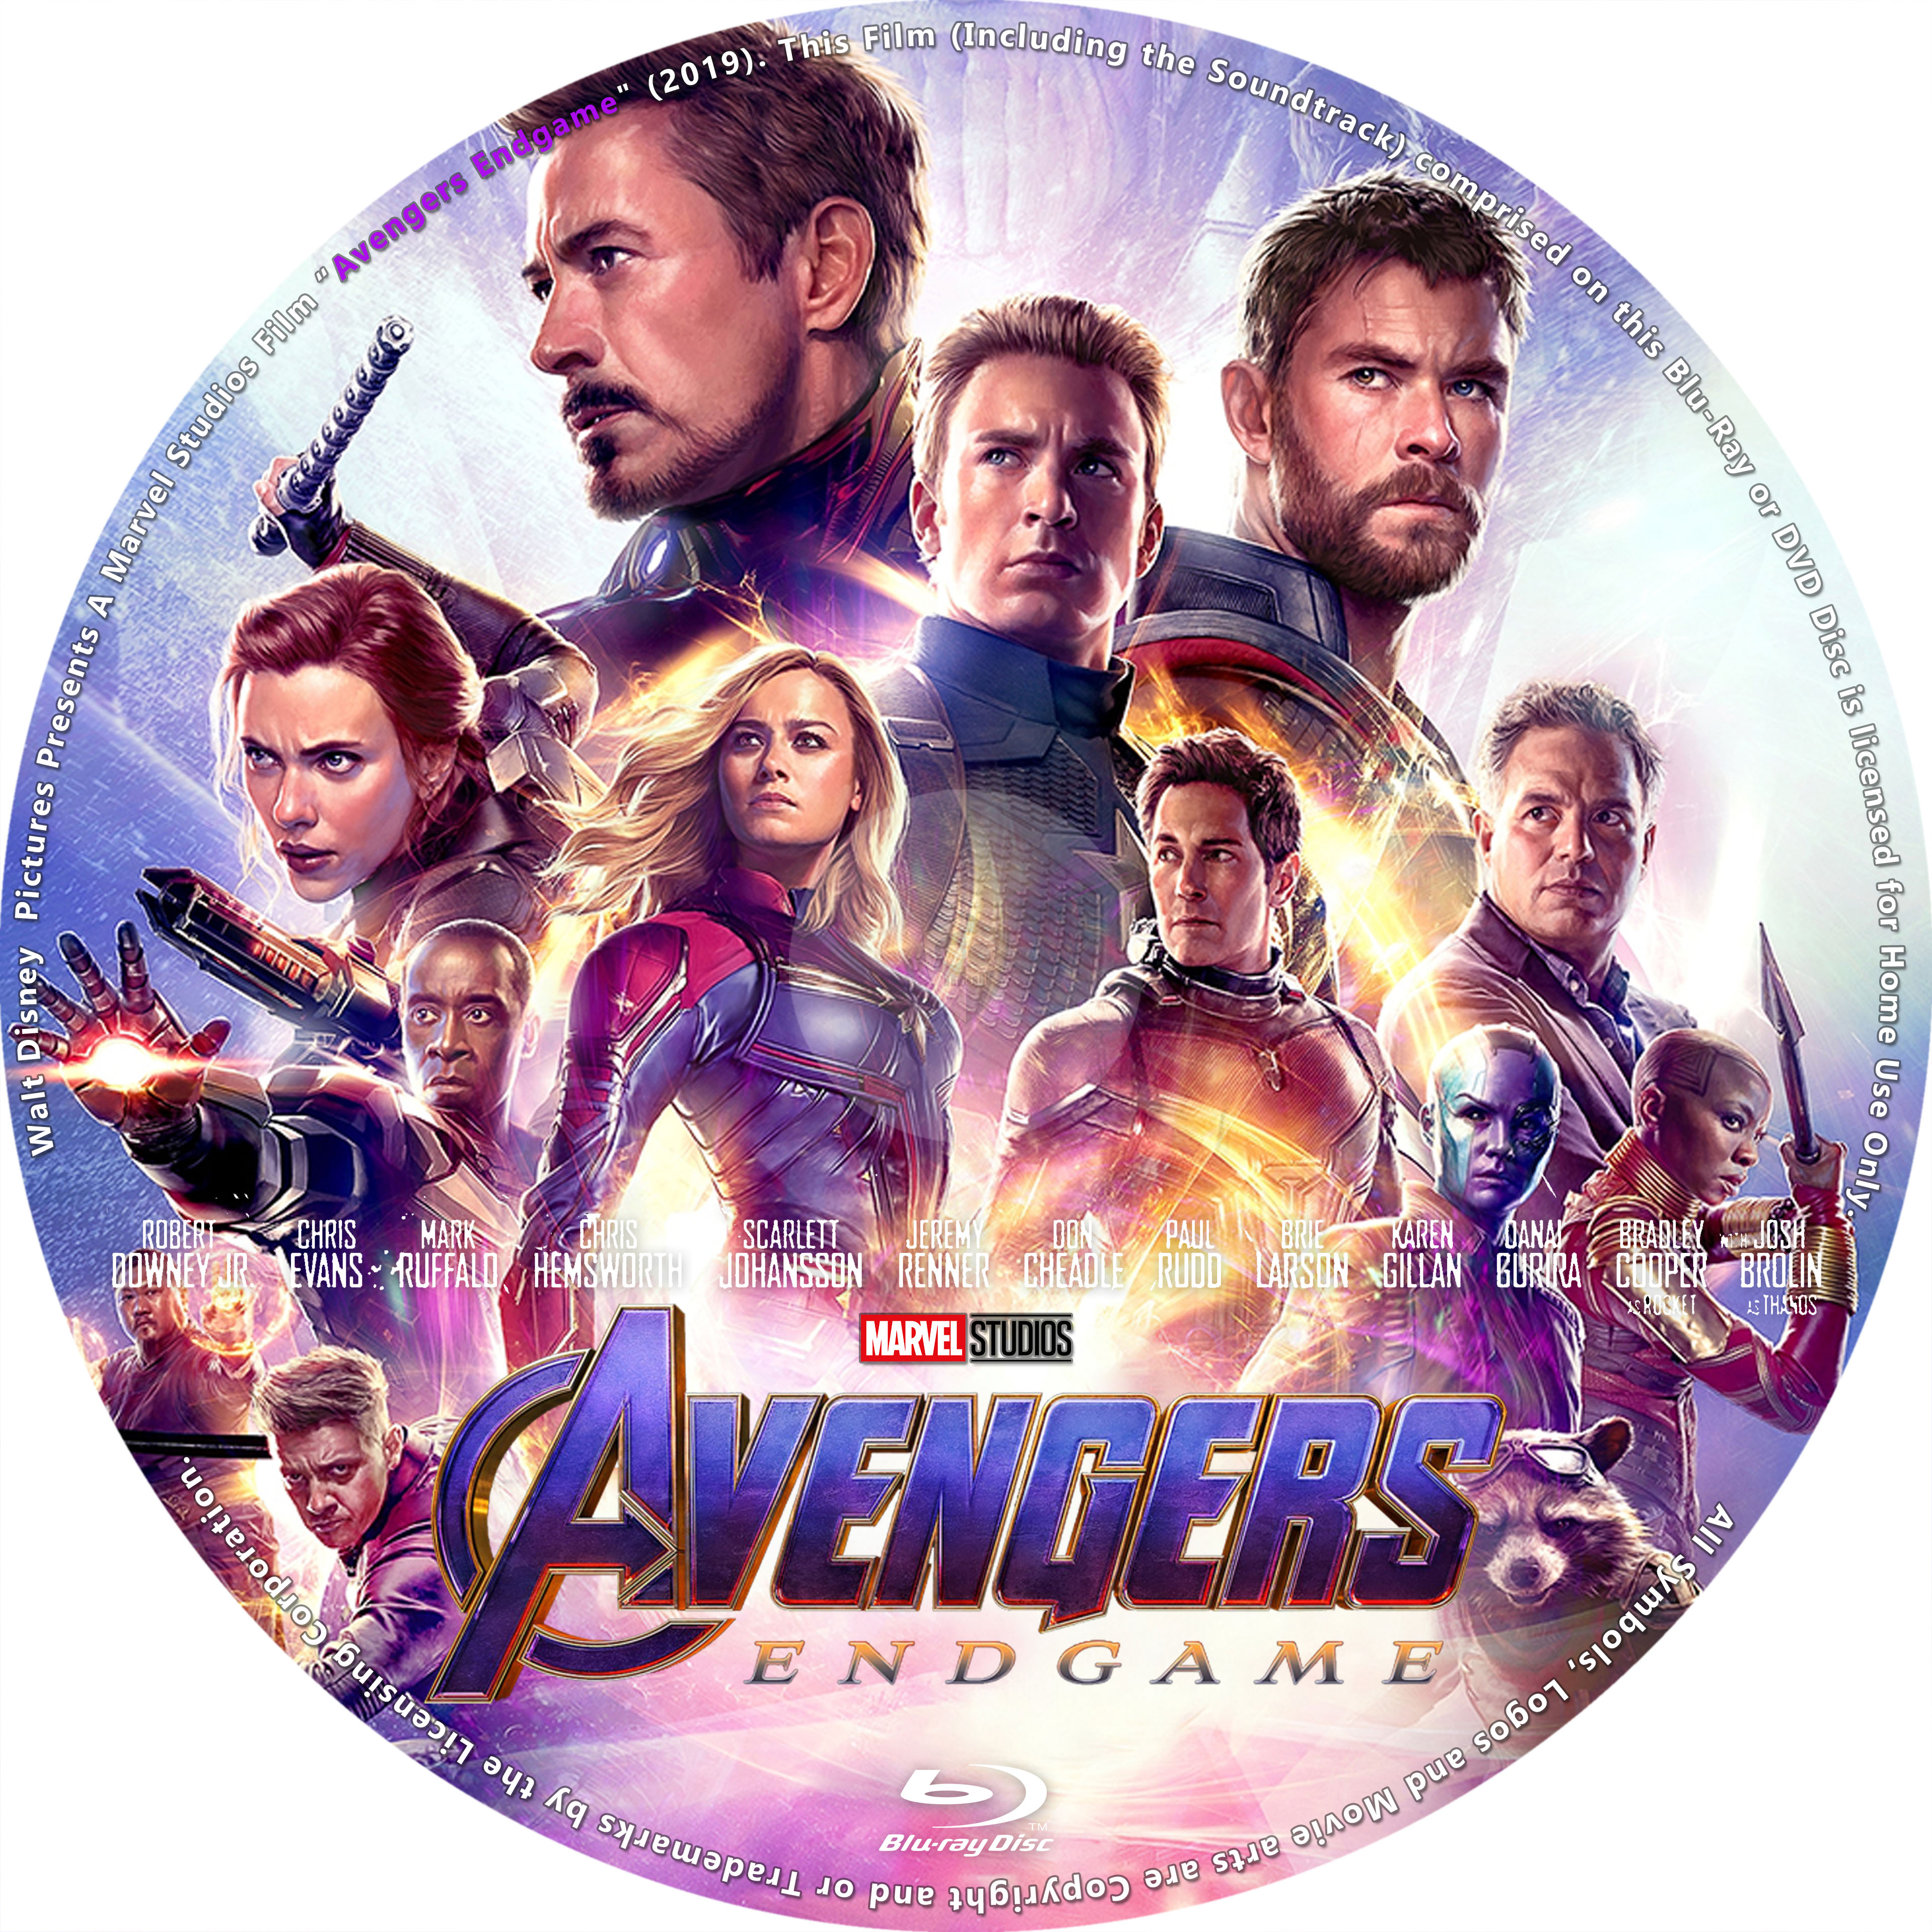 COVERS.BOX.SK Avengers Endgame (2019) high quality DVD / Blueray / Movie